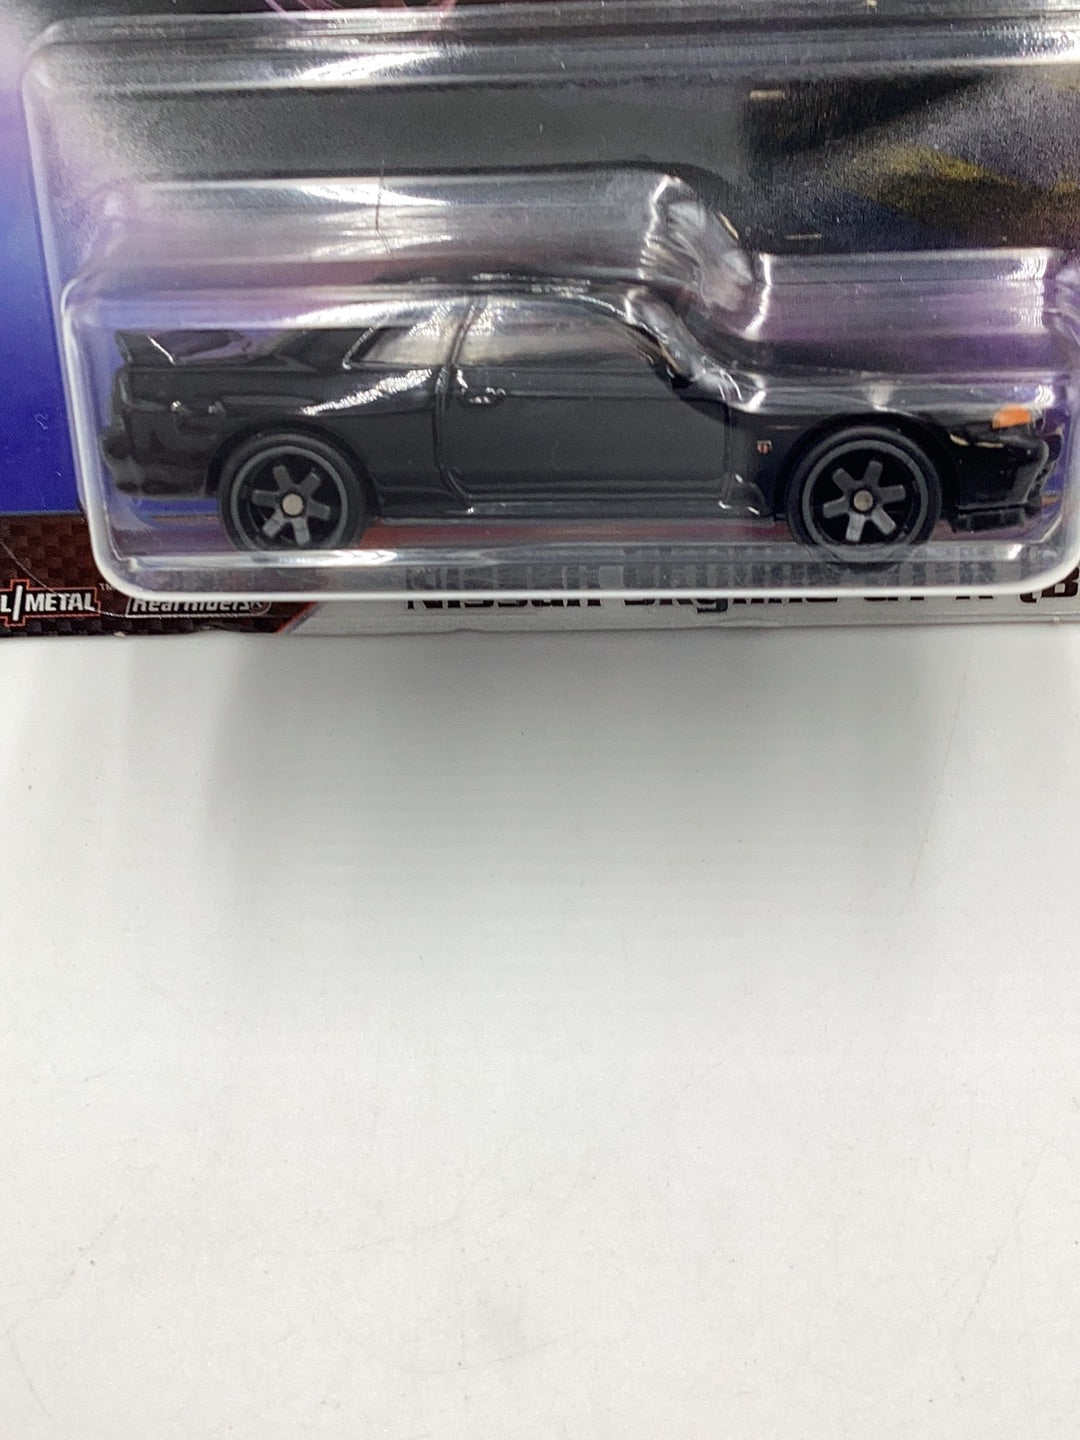 Hot Wheels fast and furious fast imports #5 nissan skyline gt-R bnr32 247A